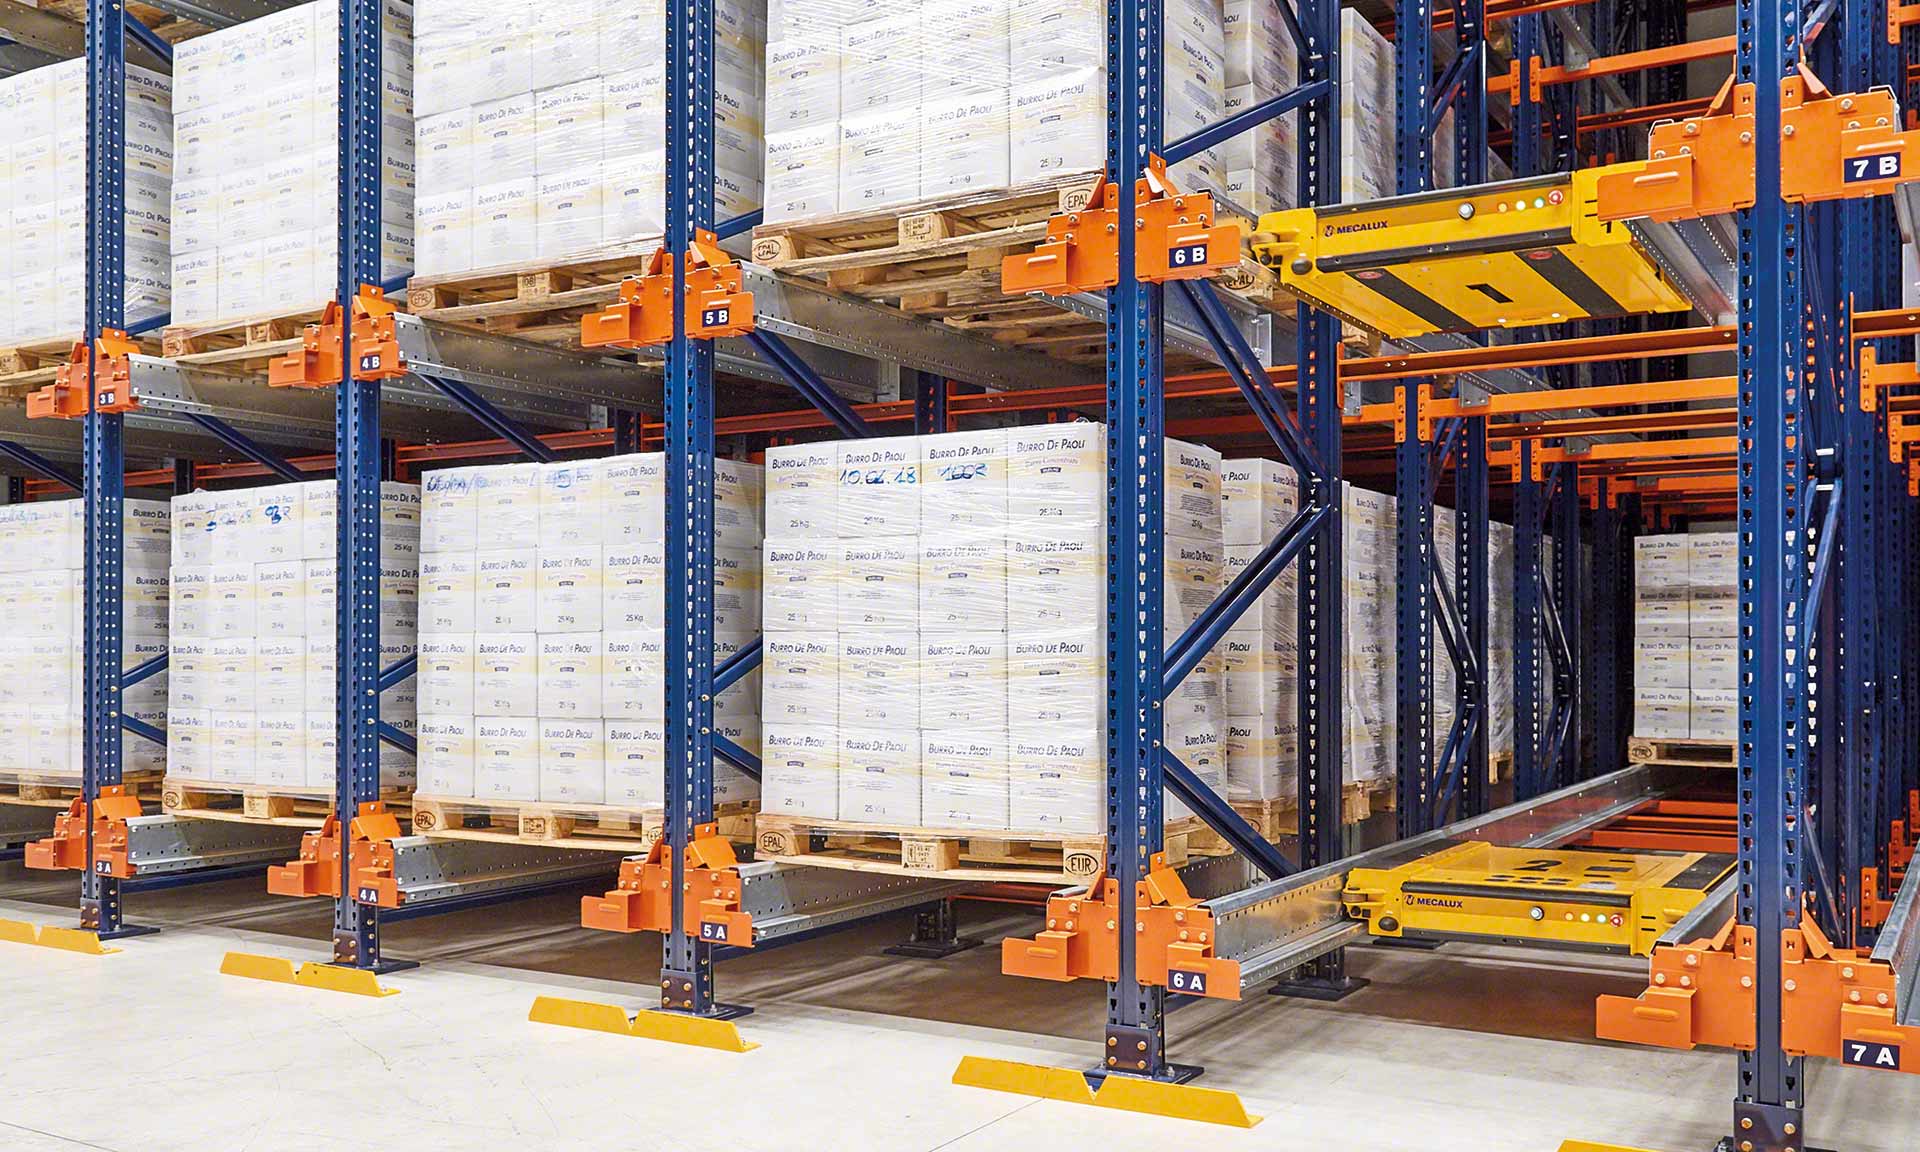 Palletizing consists of placing goods on top of a pallet